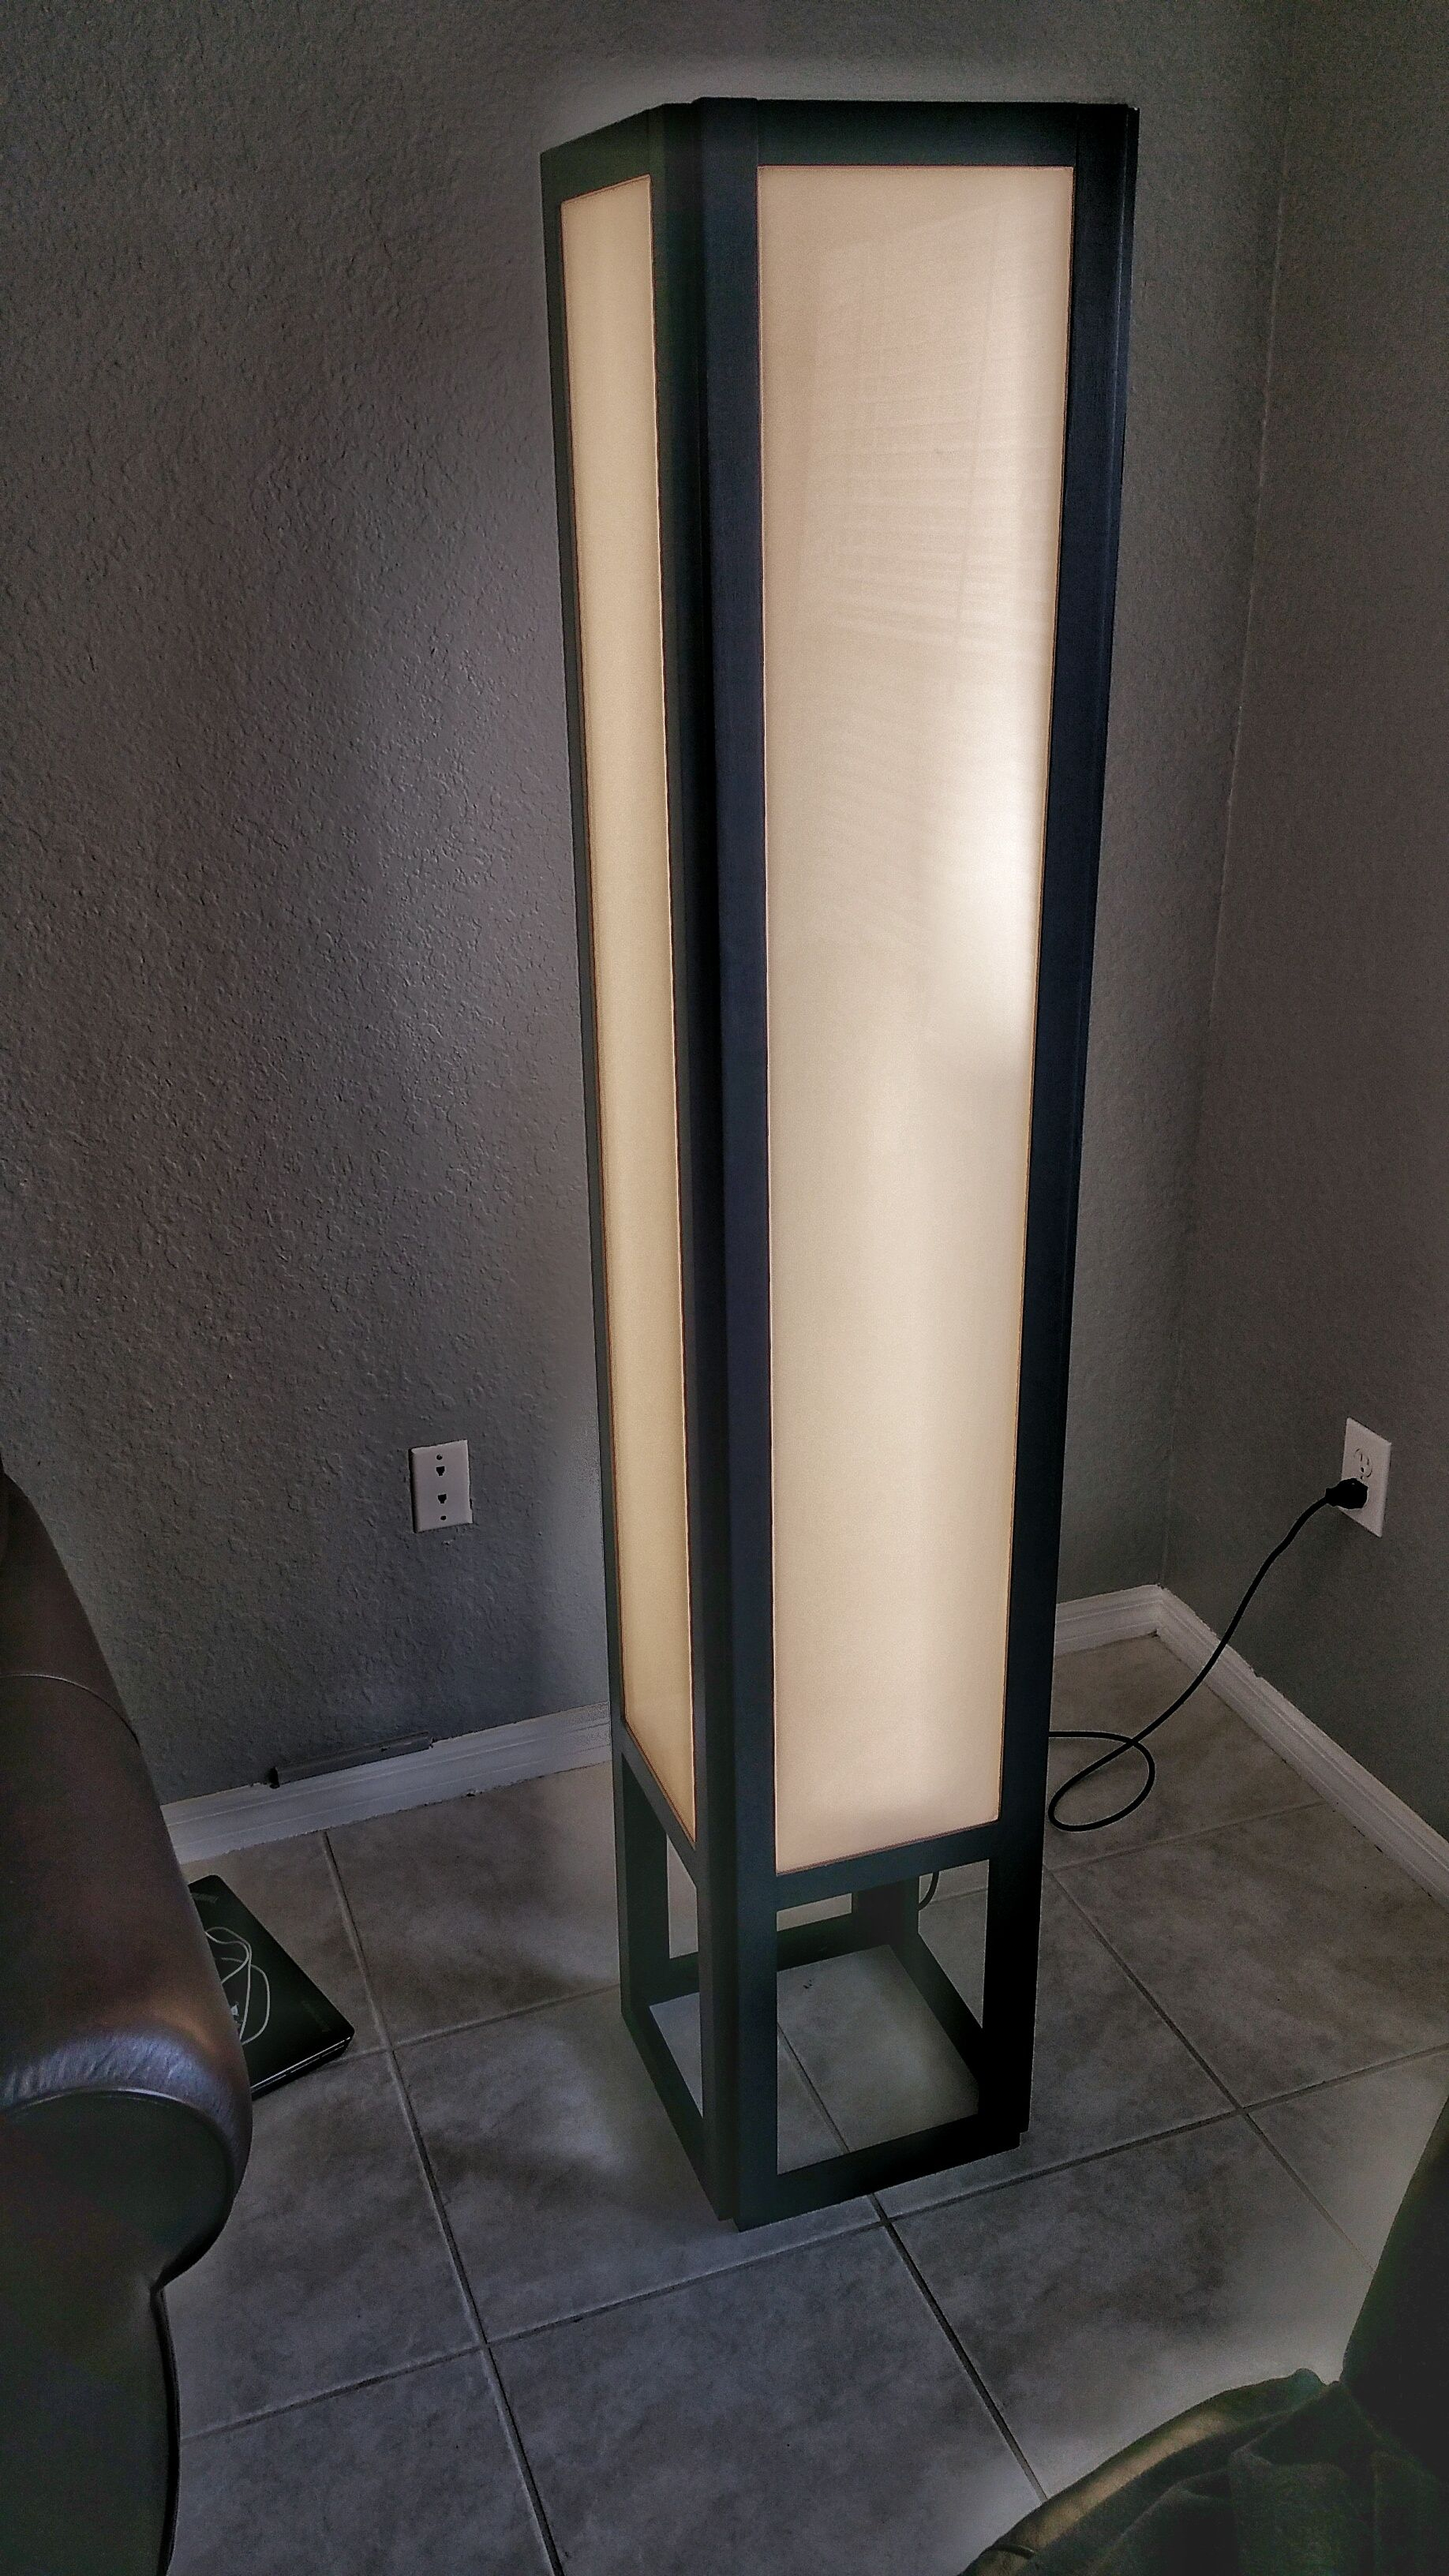 Modern Square Floor Lamp Lit With Leds Diy Floor Lamp pertaining to dimensions 1836 X 3264